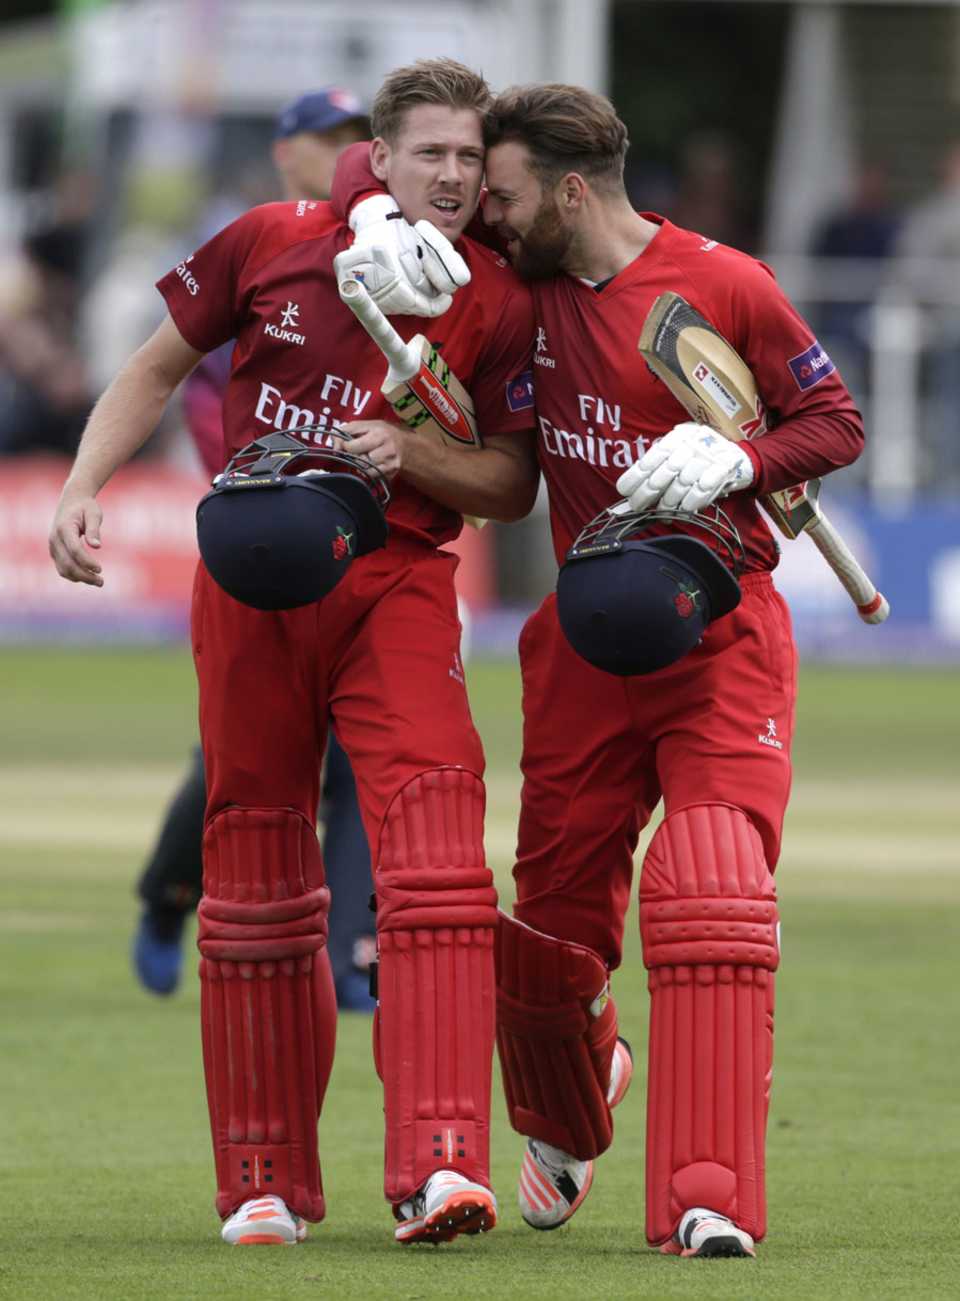 James Faulkner kept his nerve to send Lancashire through on fewer wickets lost